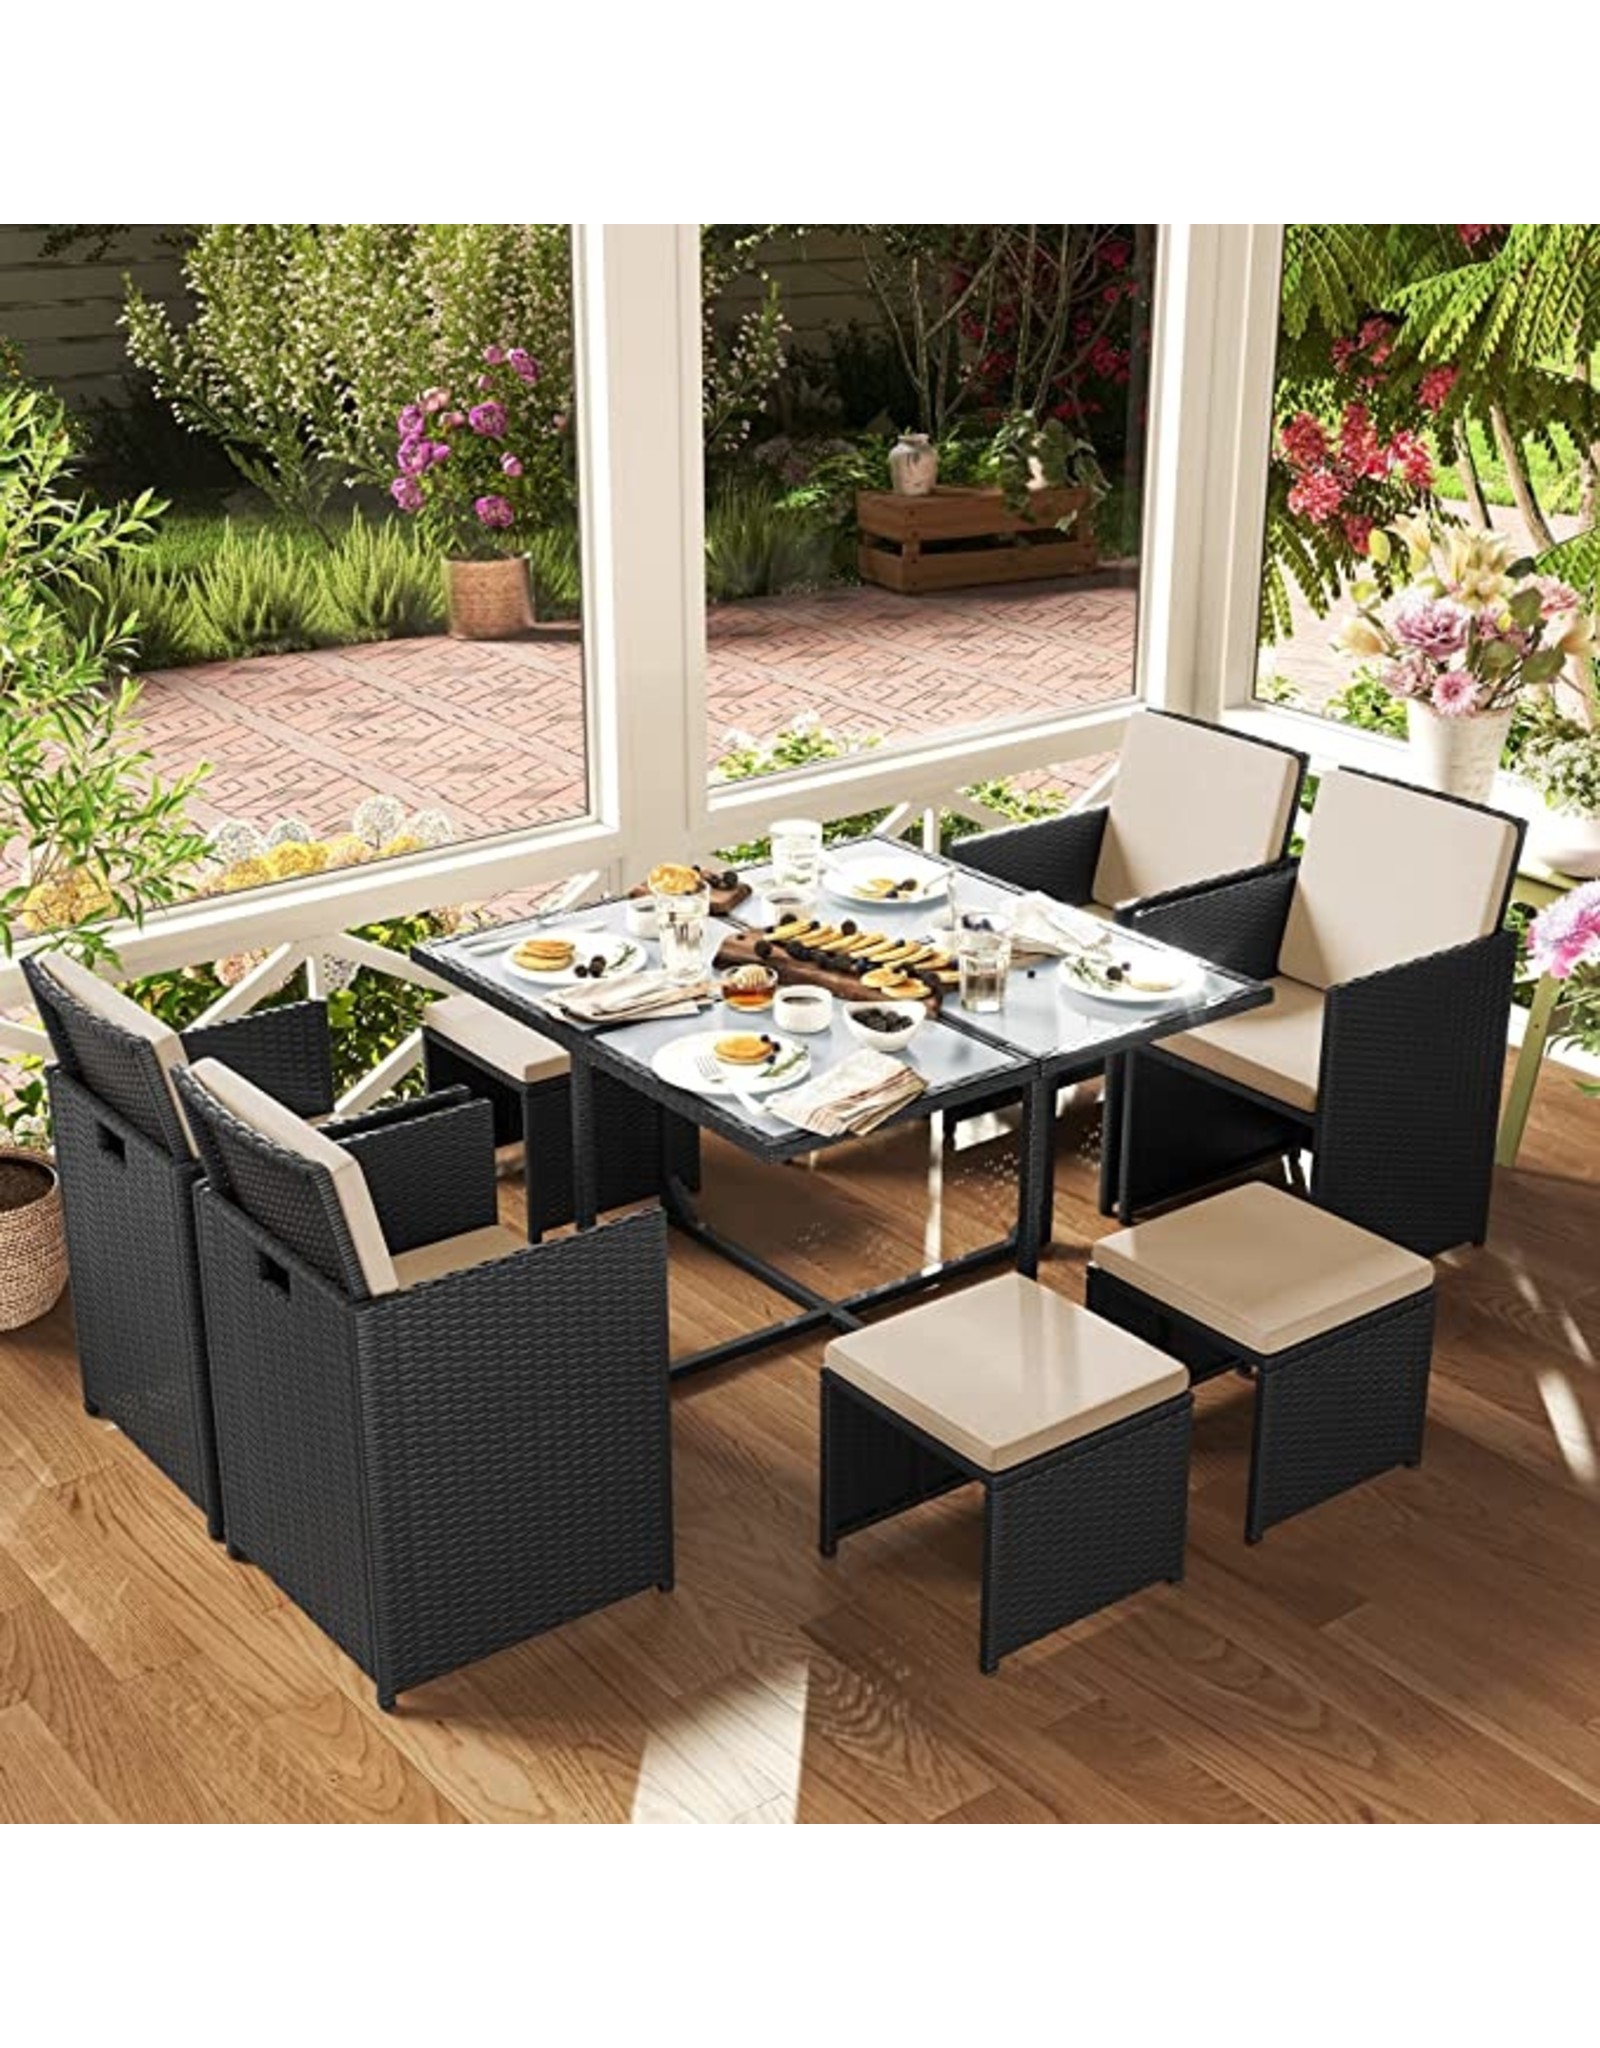 Parya Garden Parya Garden Garden furniture set, Dining table and chairs, set of 9 PE rattan patio furniture, dining room furniture, coffee table with glass top, with cushions, space saver, black and beige